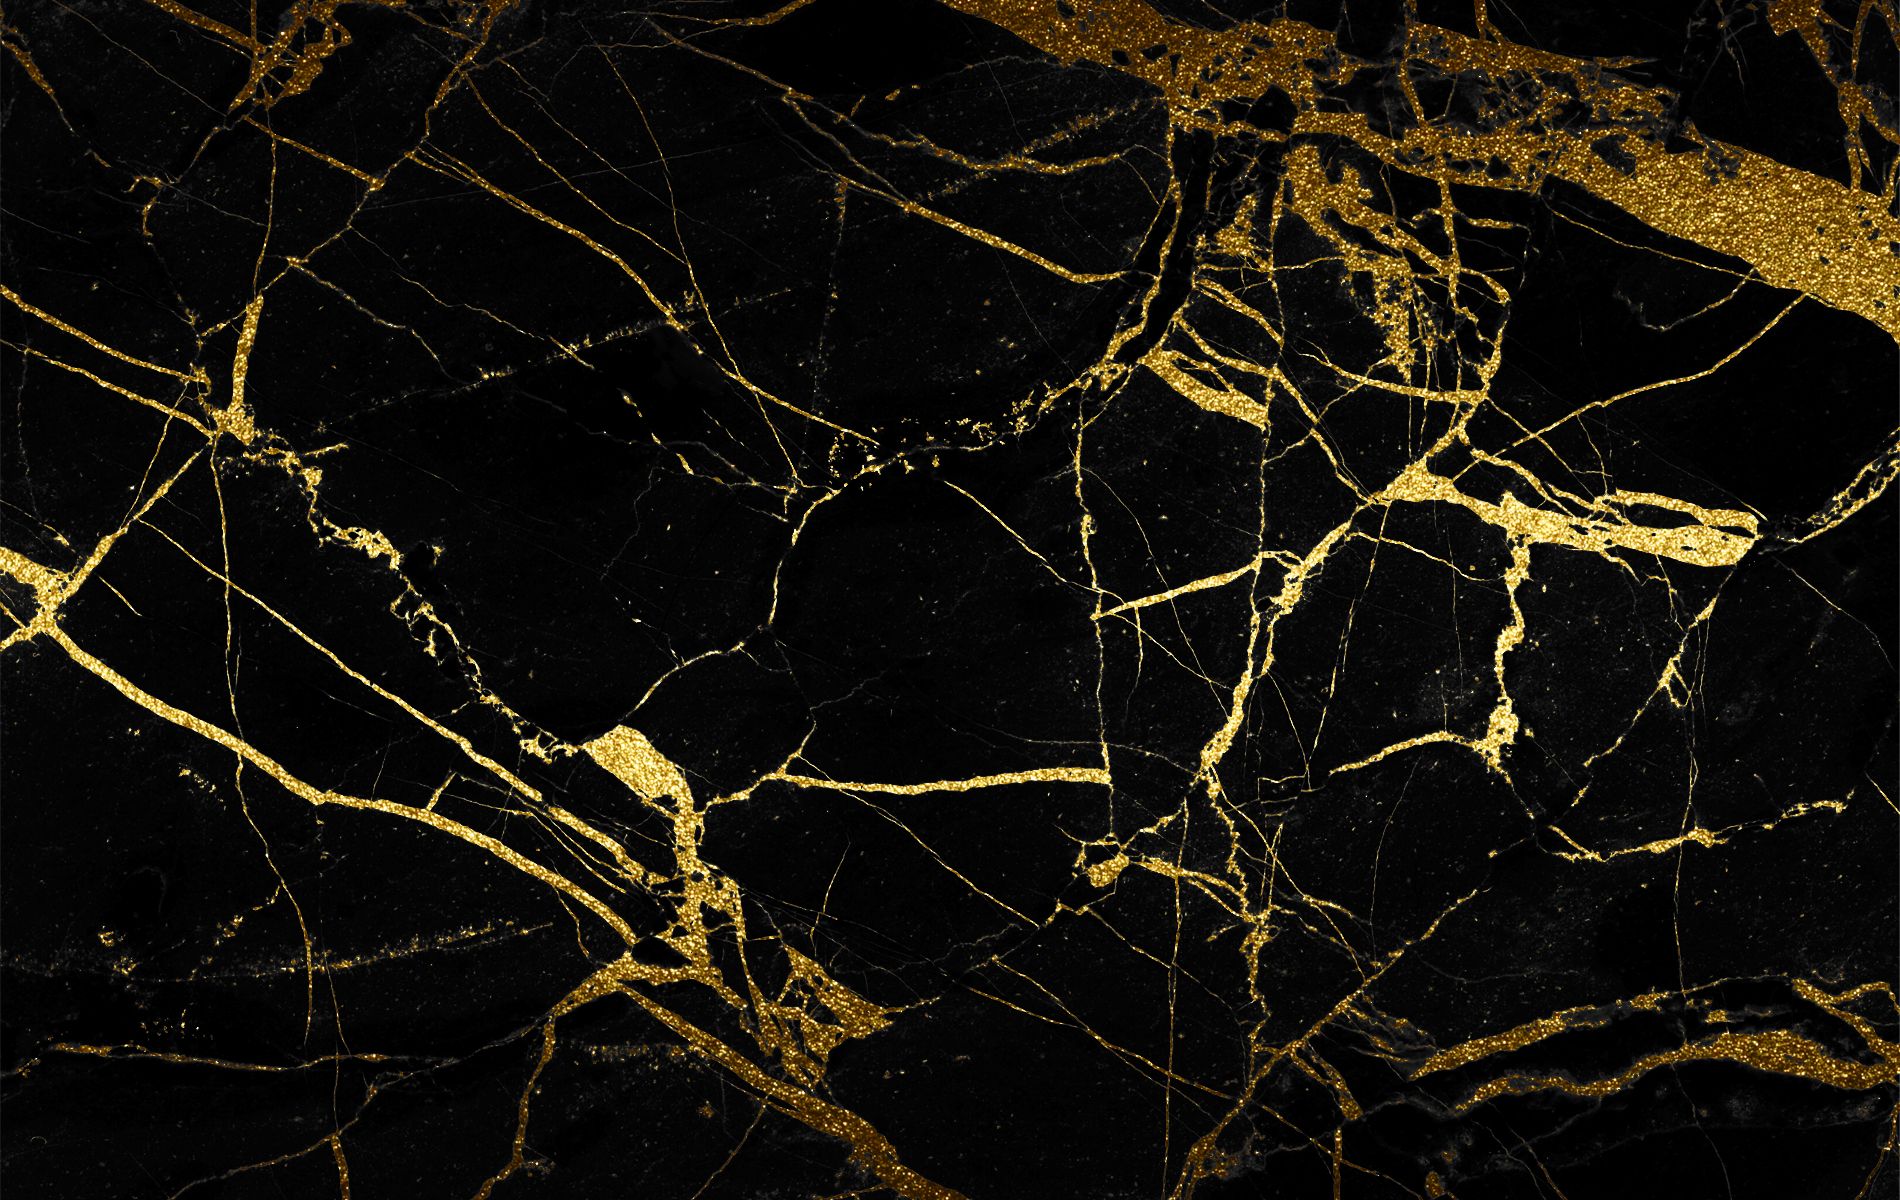 Modern Black And Gold Wallpapers